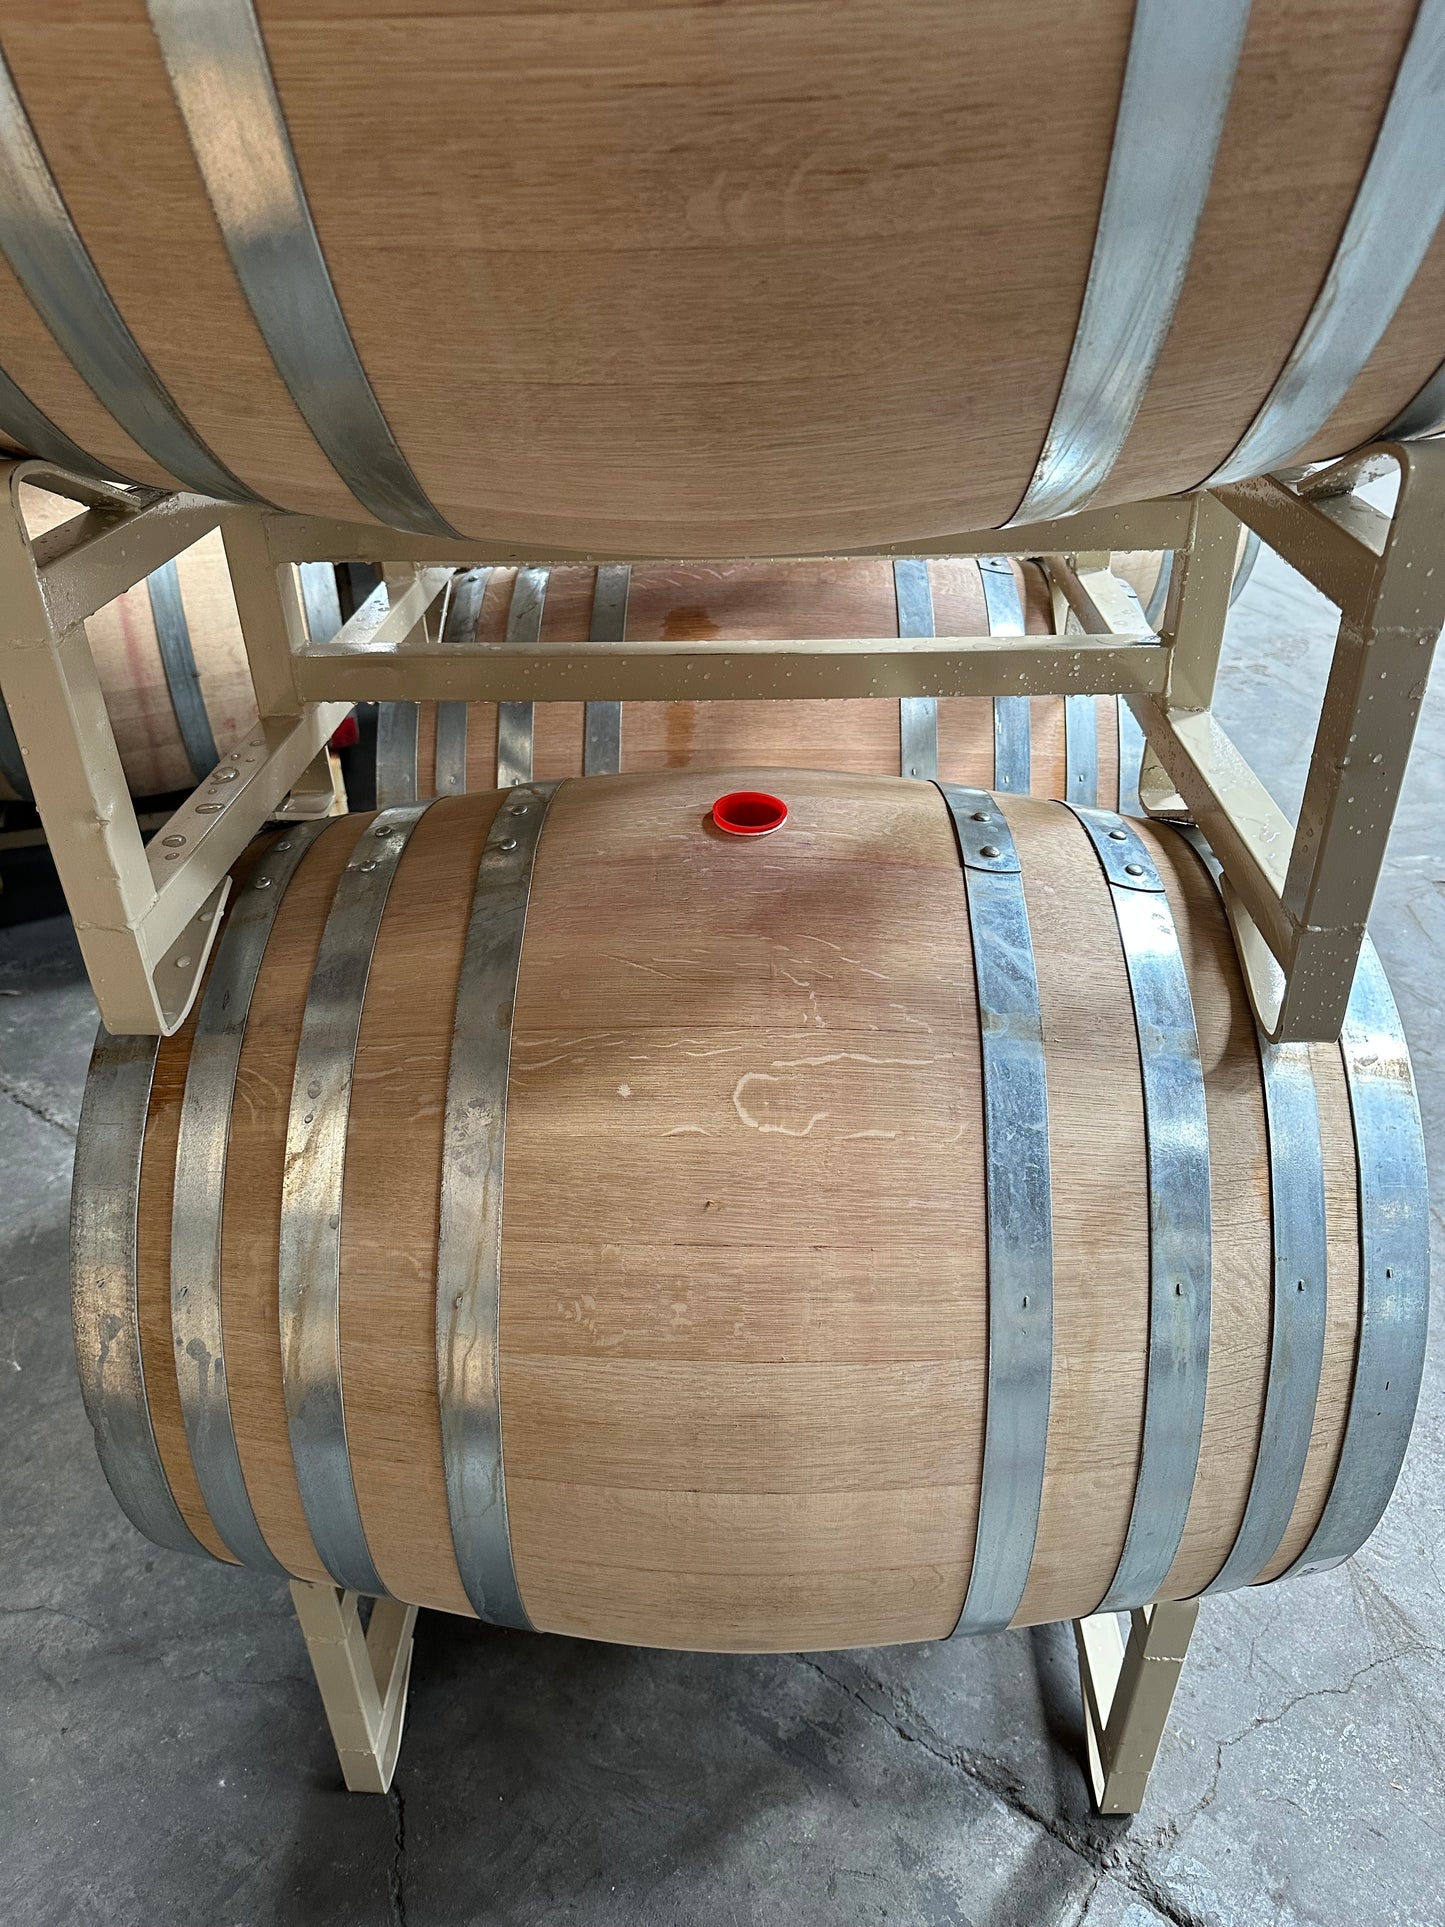 2022 French Oak Reds - 6 Month Use